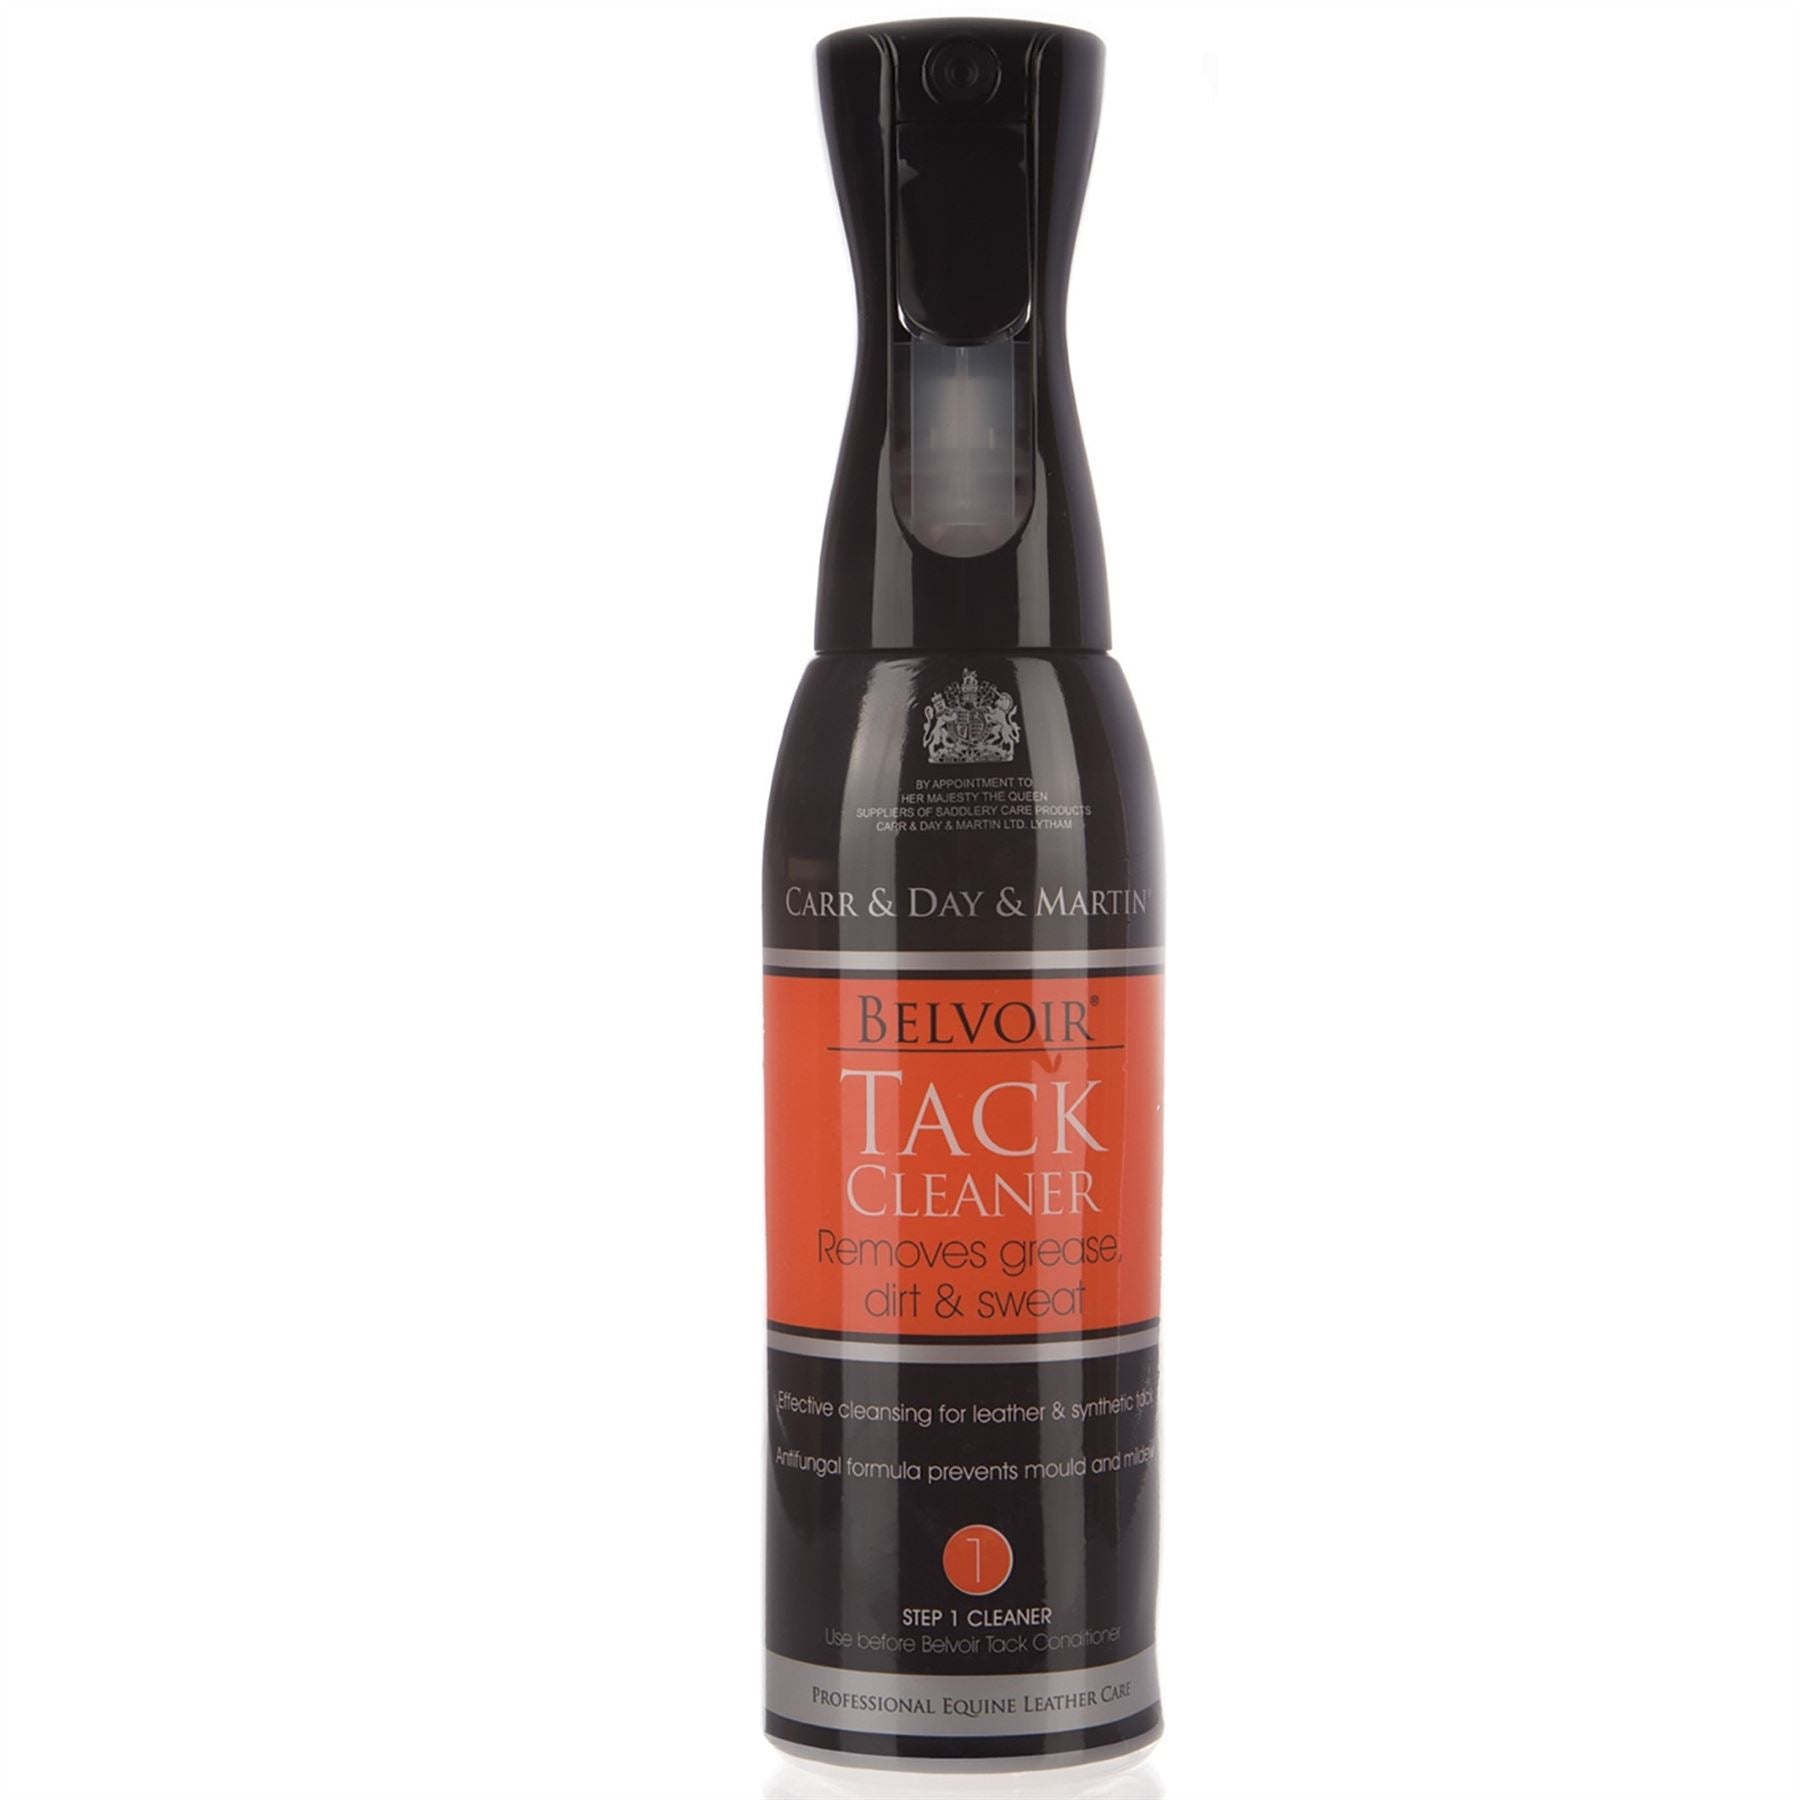 Carr & Day & Martin Belvoir Tack Cleaner Step 1 Spray - Just Horse Riders